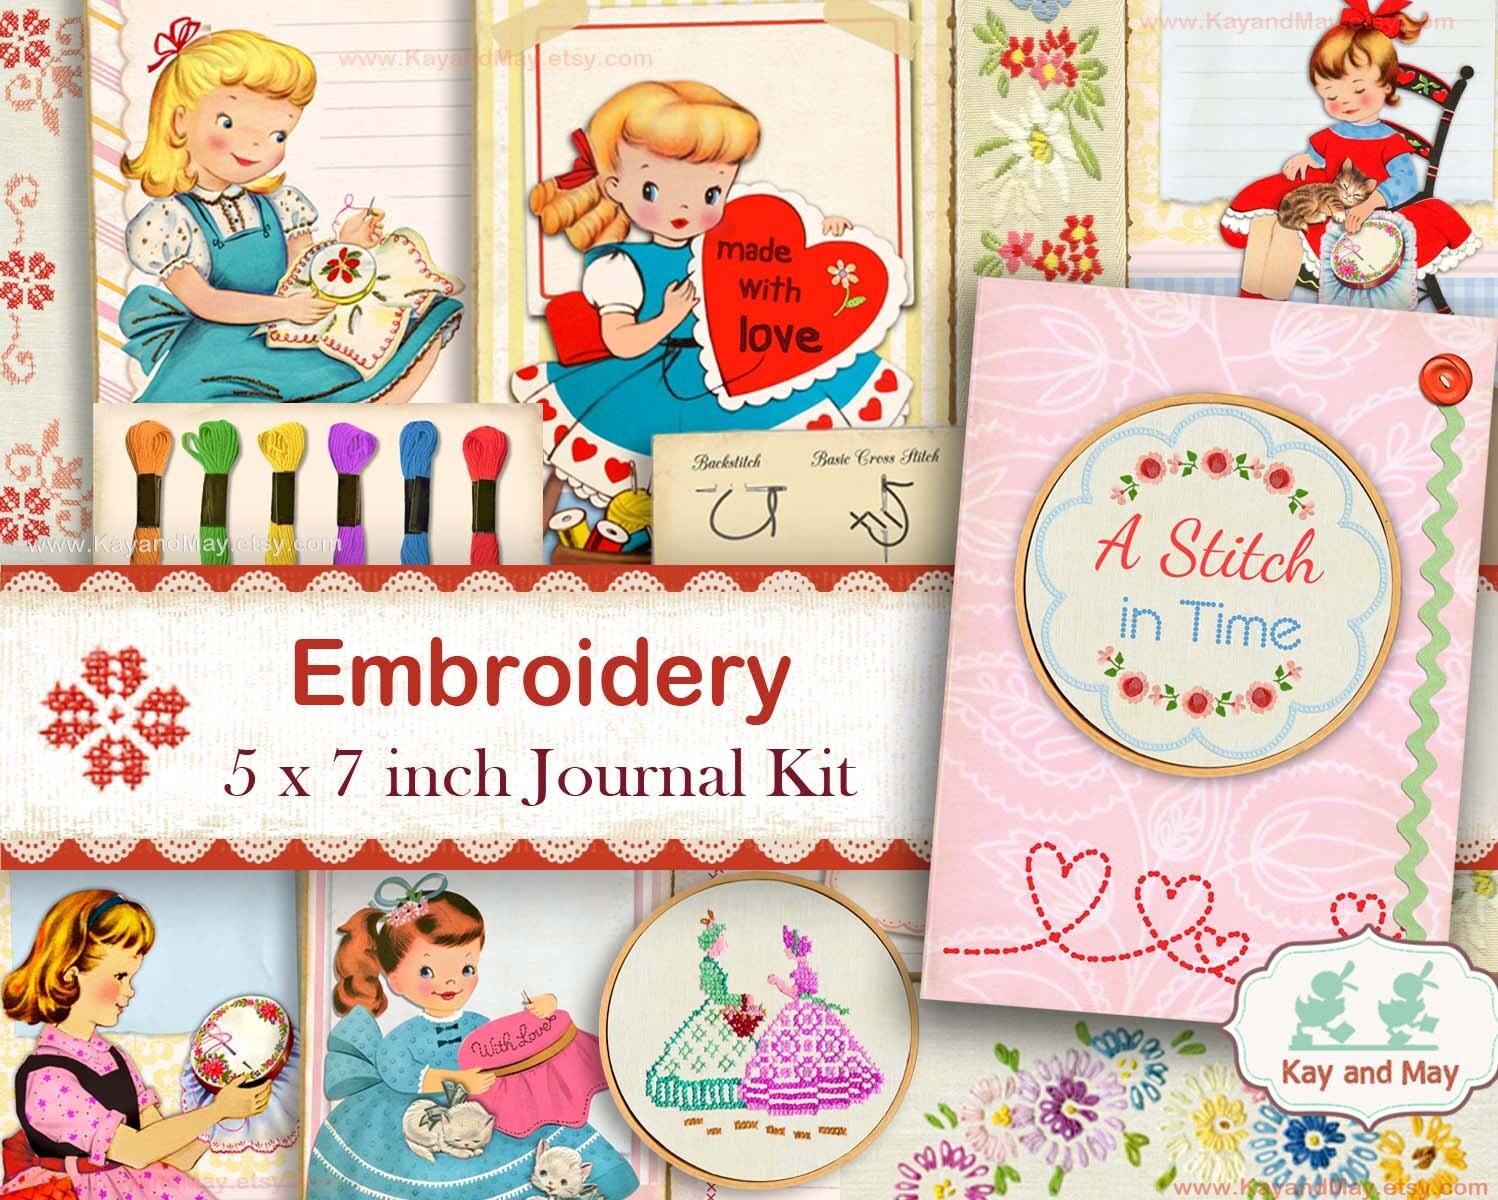 Embroidery Journal Page Sewing Needle Work Journal Kit 